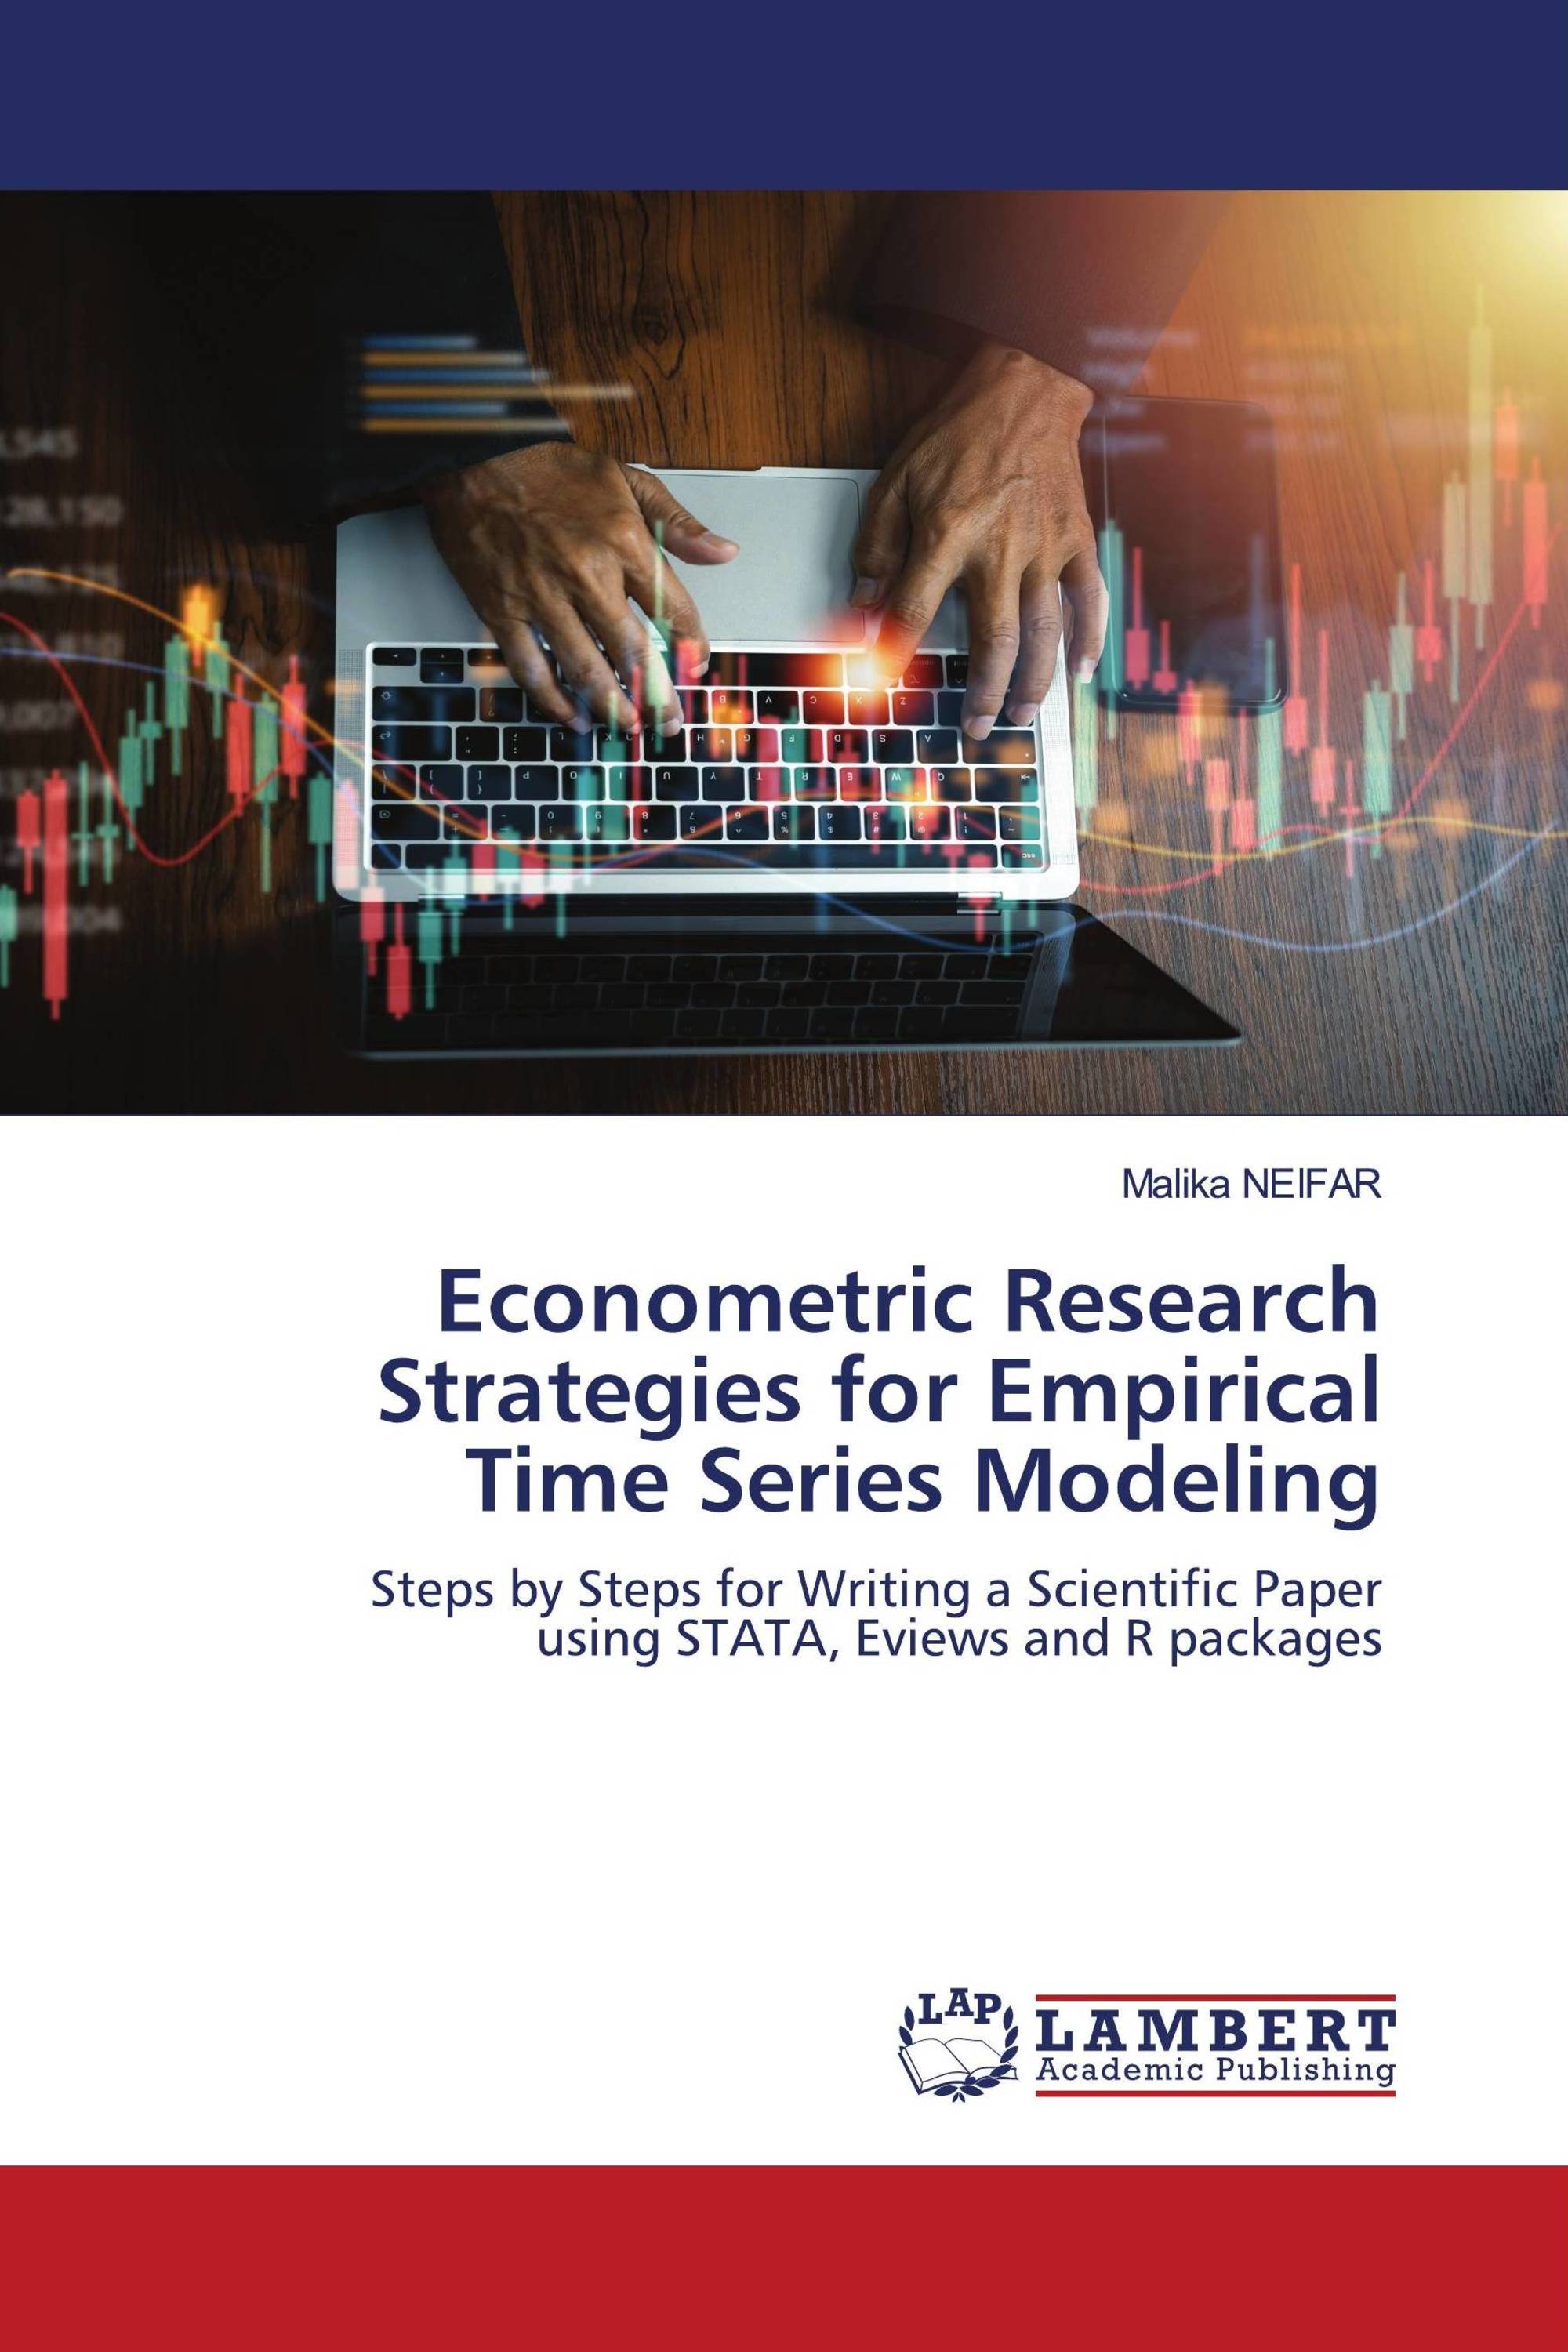 Econometric Research Strategies for Empirical Time Series Modeling